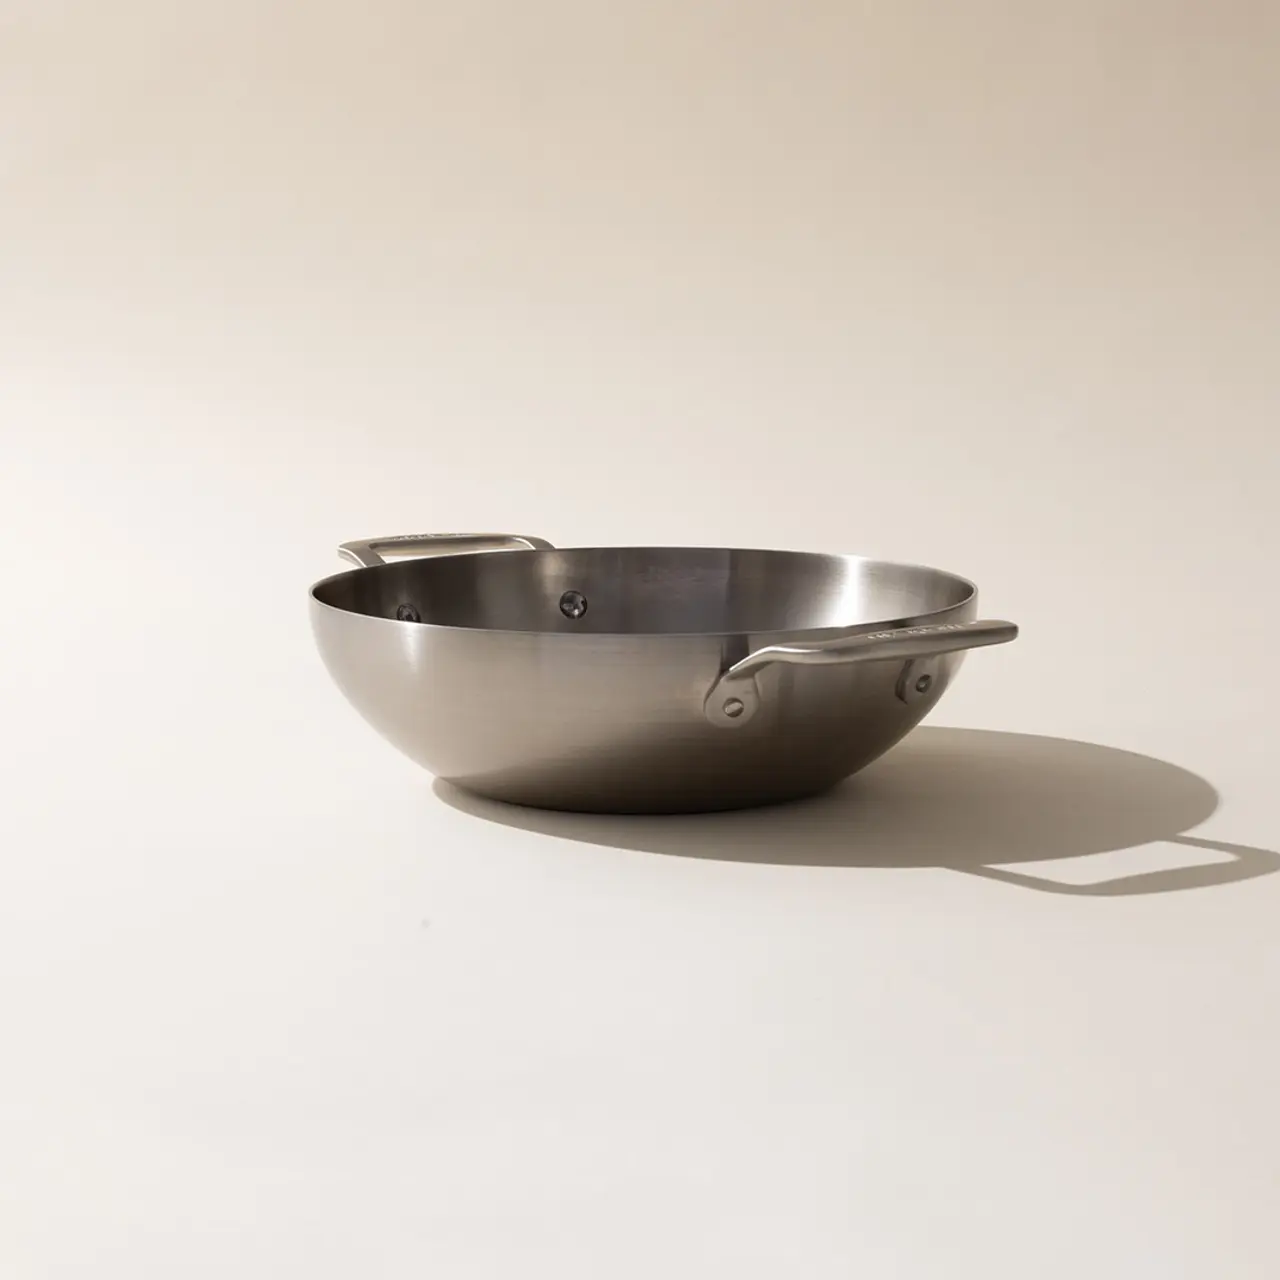 A stainless steel mixing bowl with riveted handles sits on a plain surface with its shadow visible.